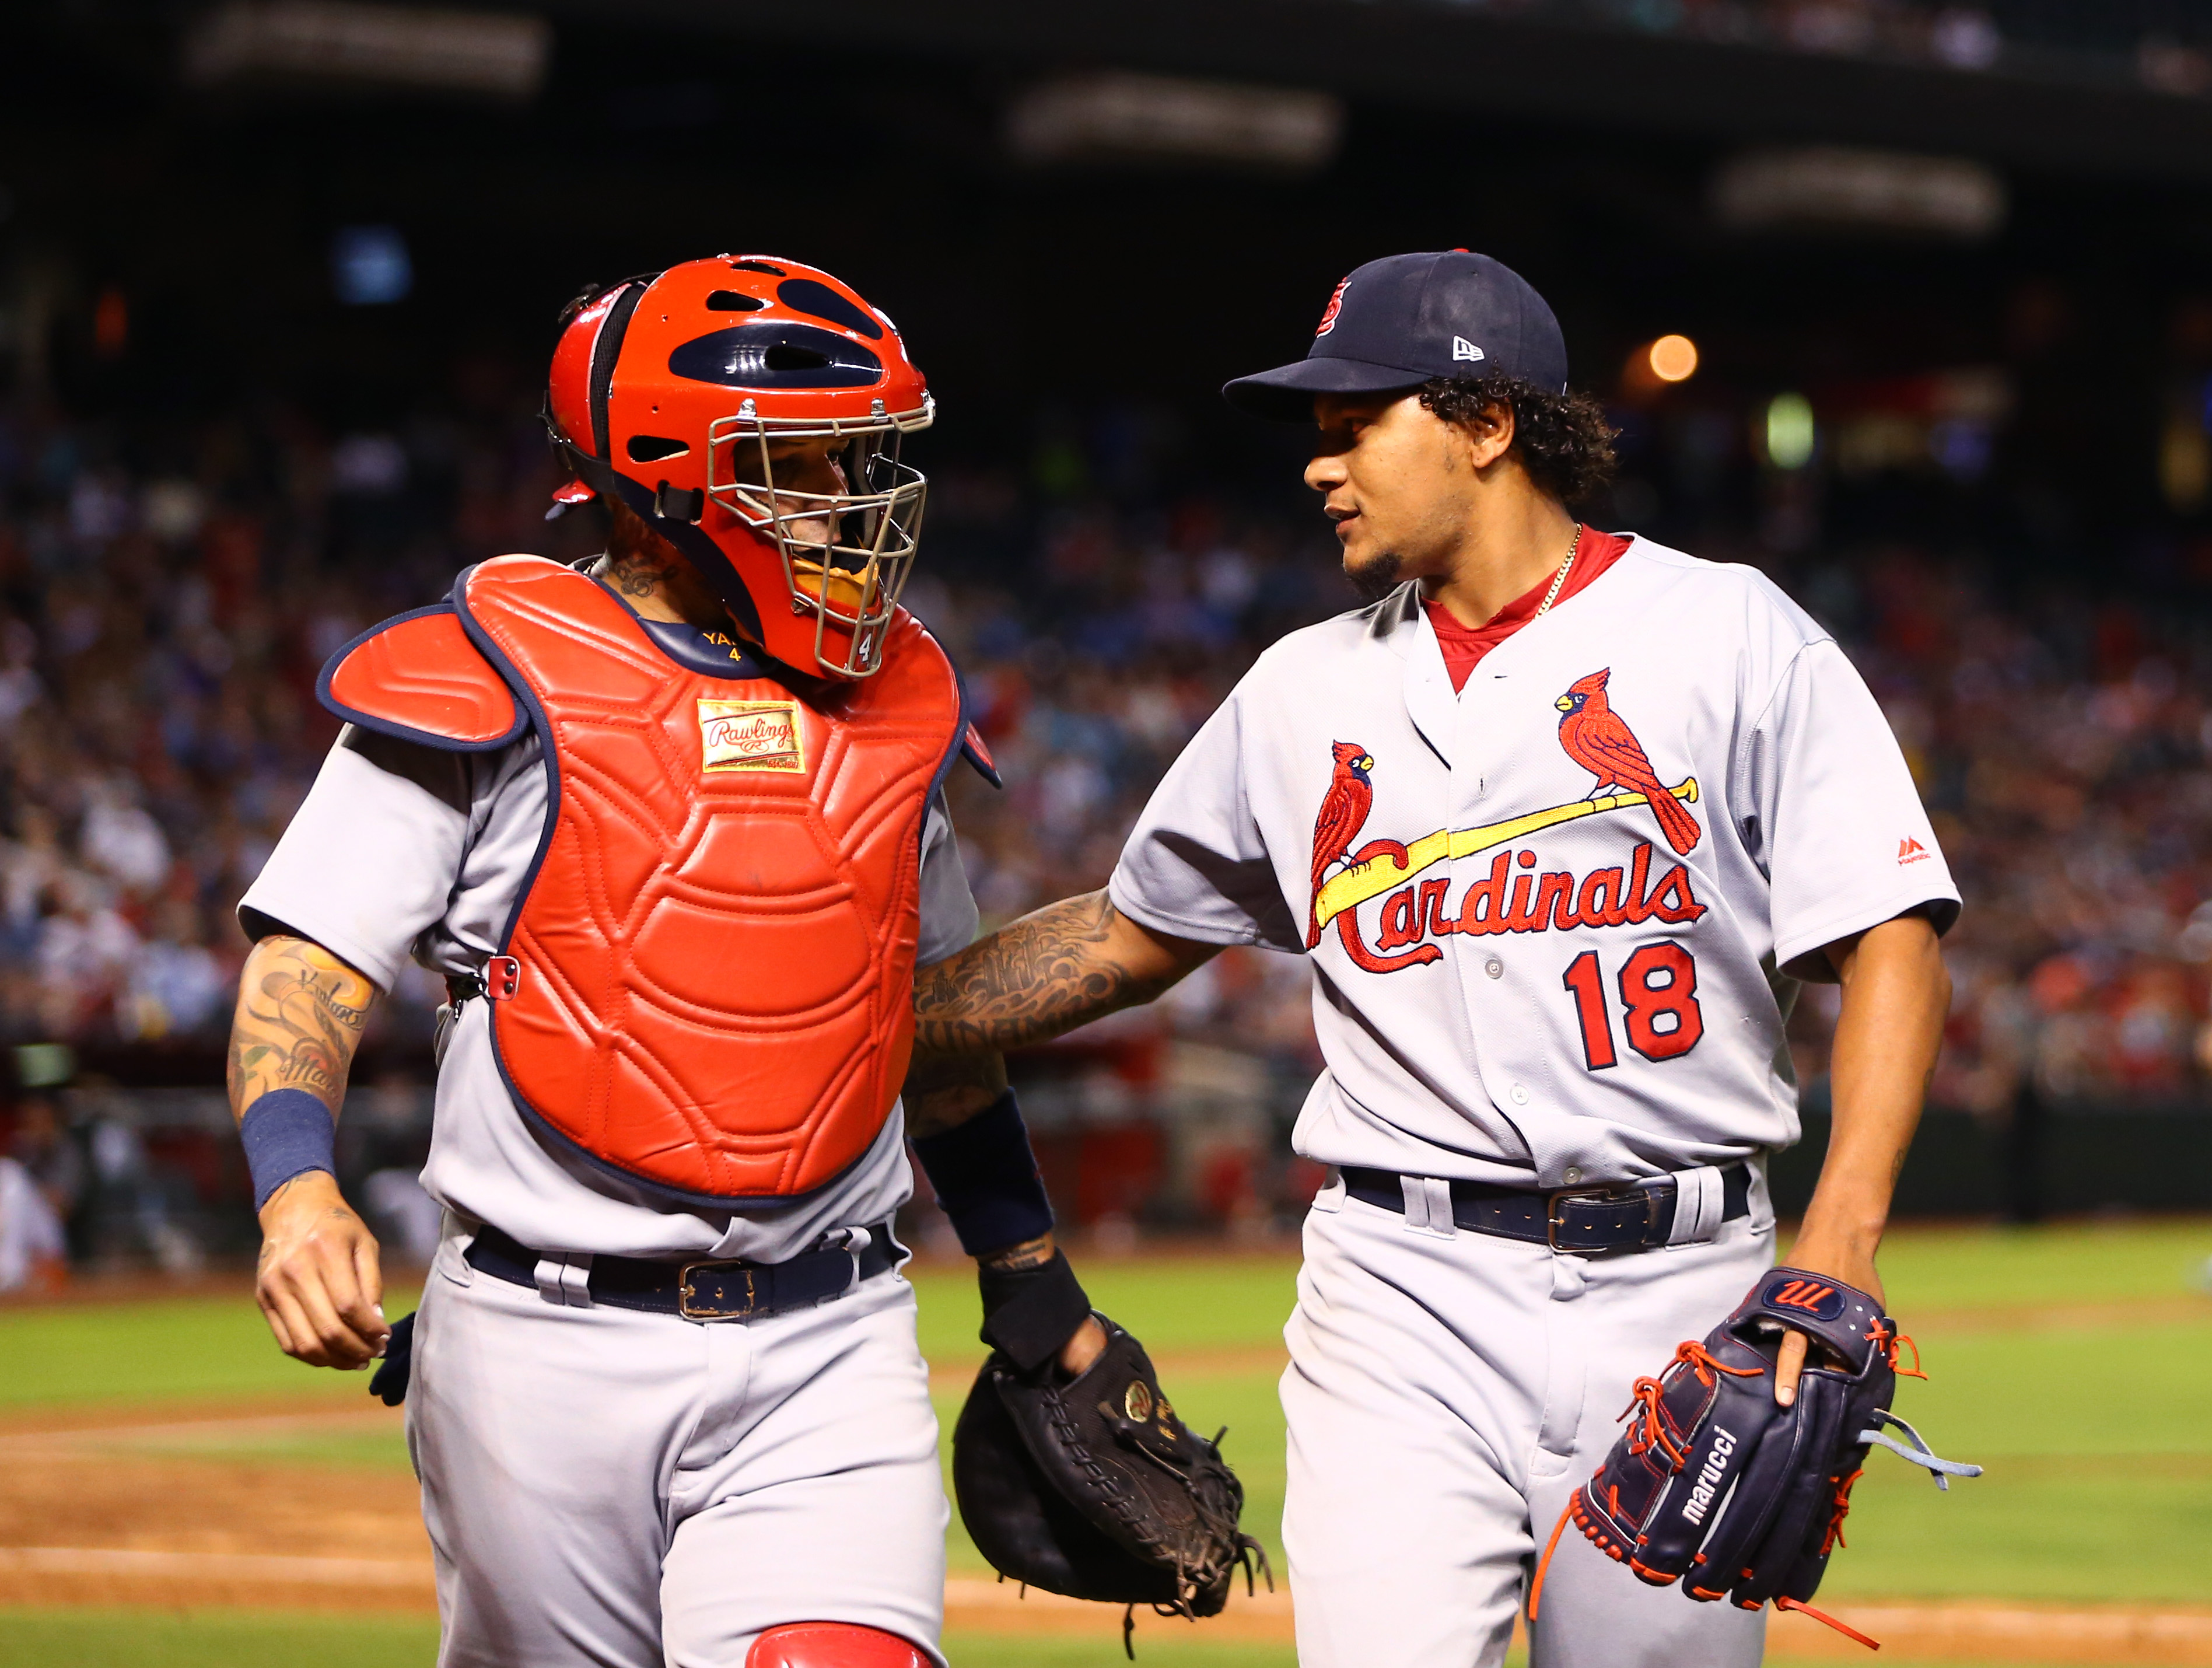 MLB All-Star Game rosters: Yadi, Martinez elected as All-Stars